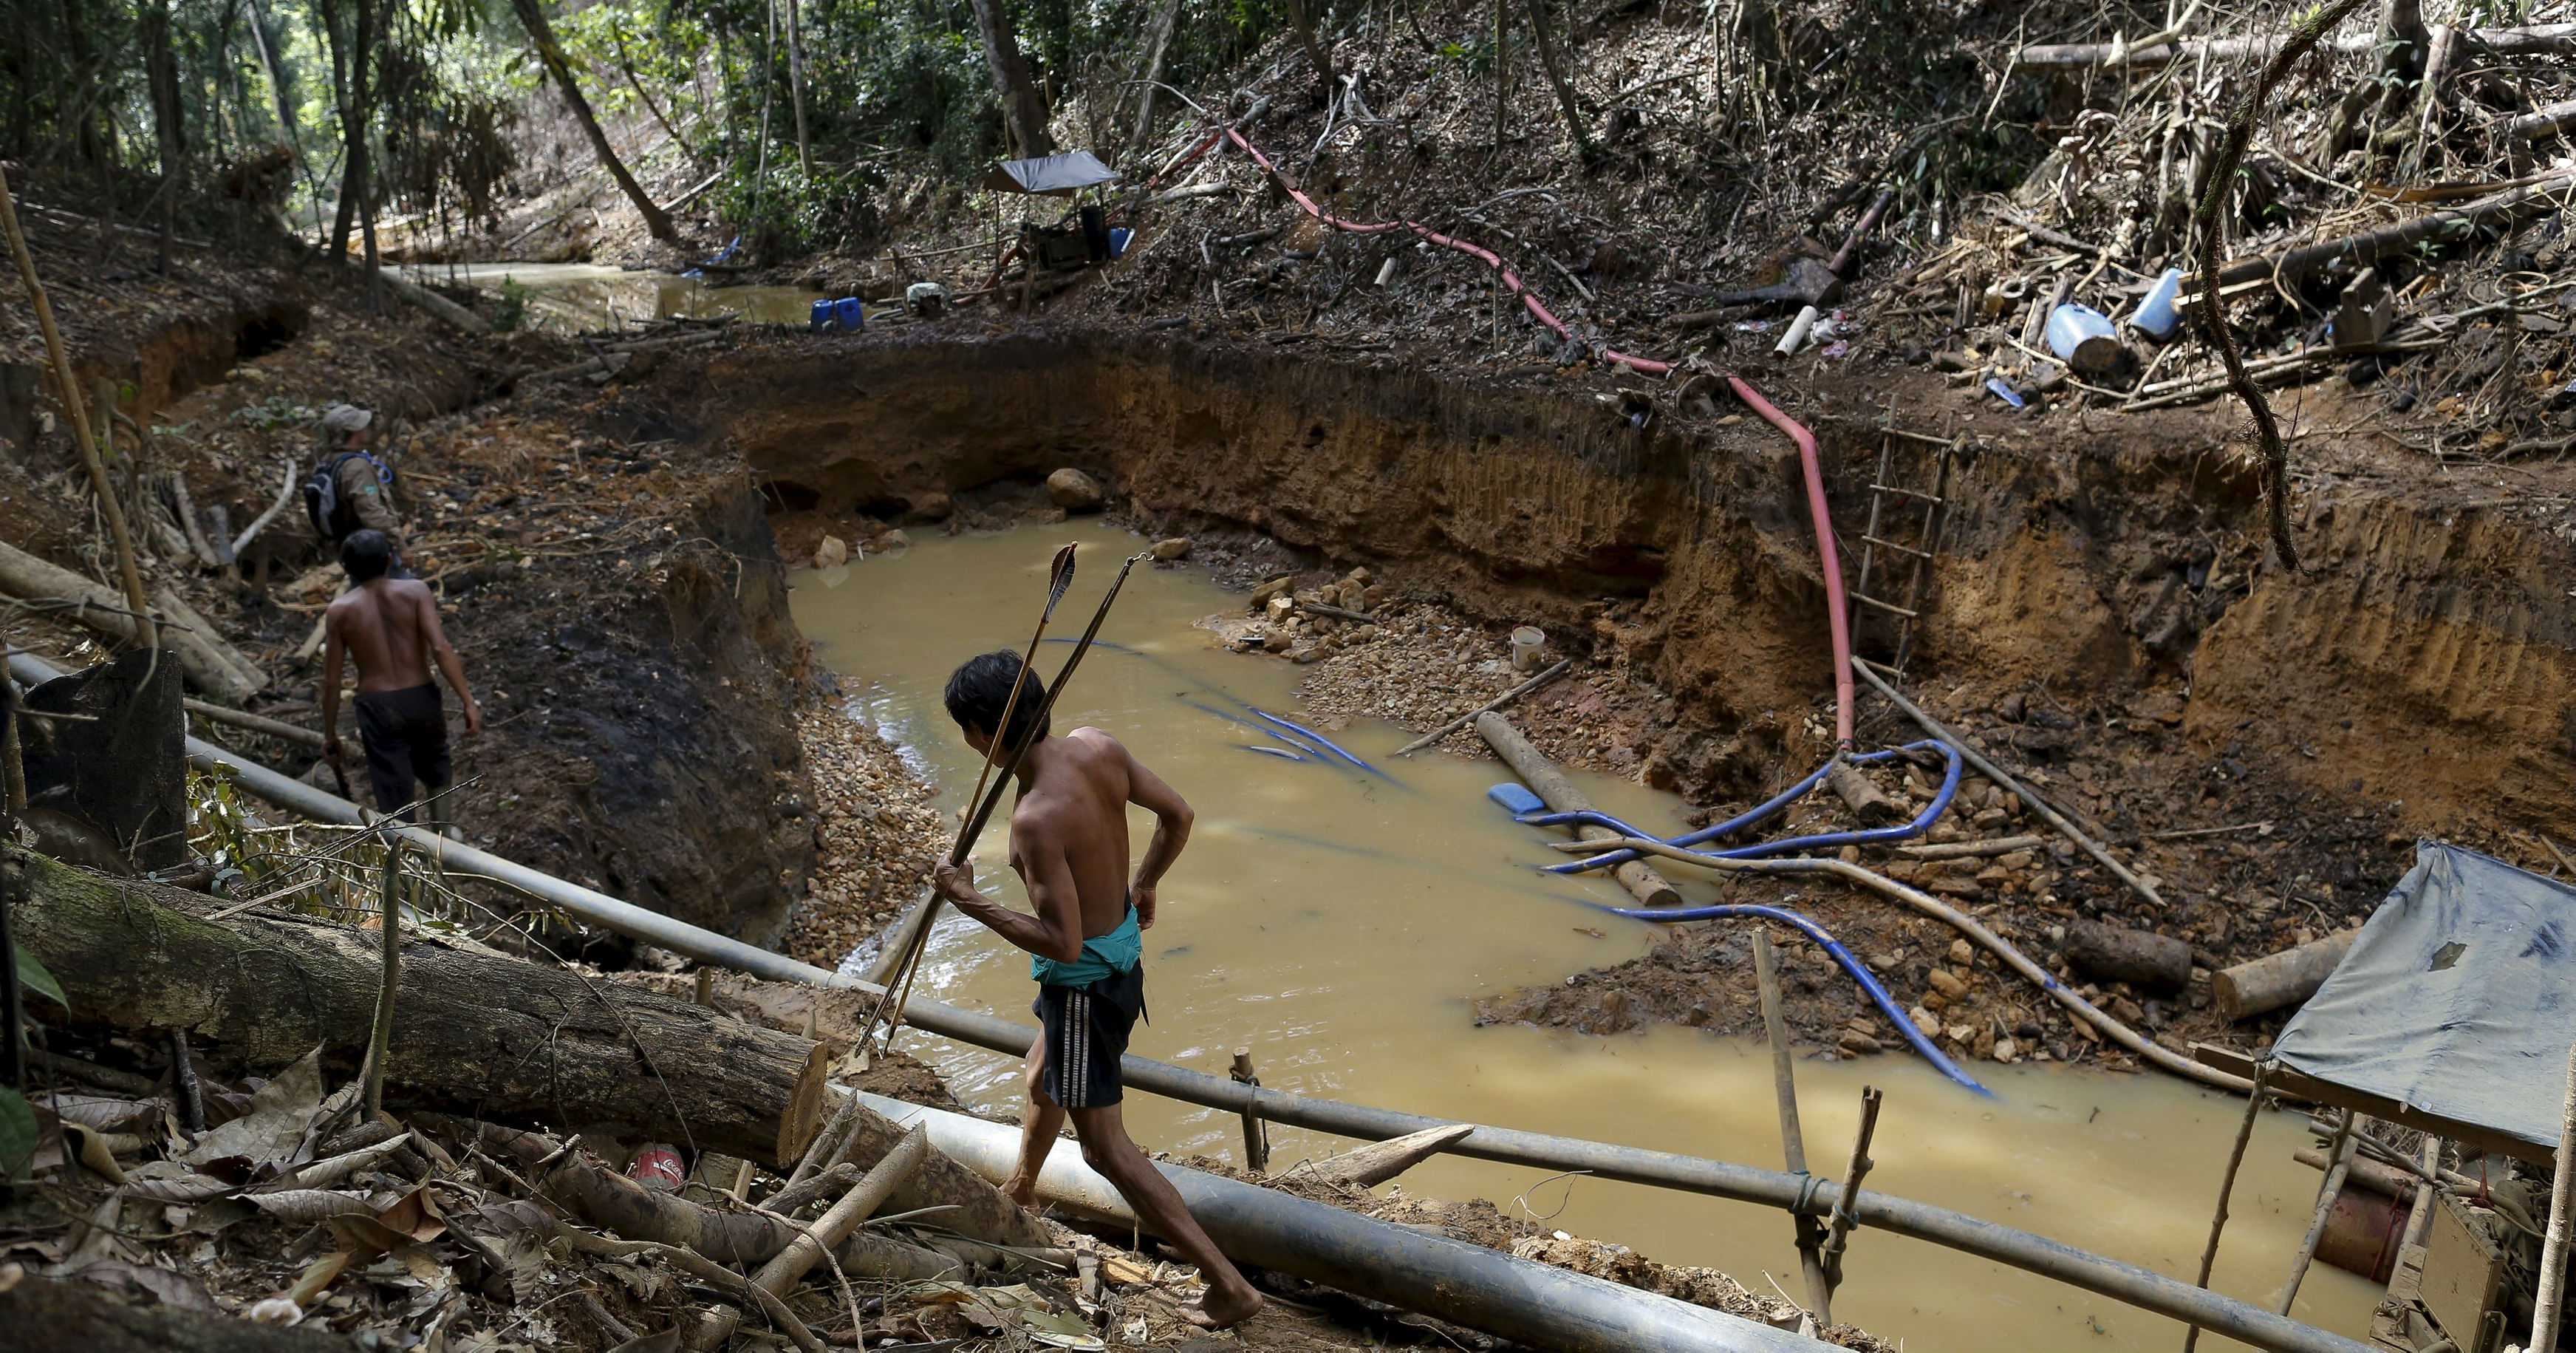 Yanomami indians follow agents of Brazil's environmental agency in an illegal gold mine in the heart of the Amazon rainforest, in Roraima state, Brazil.